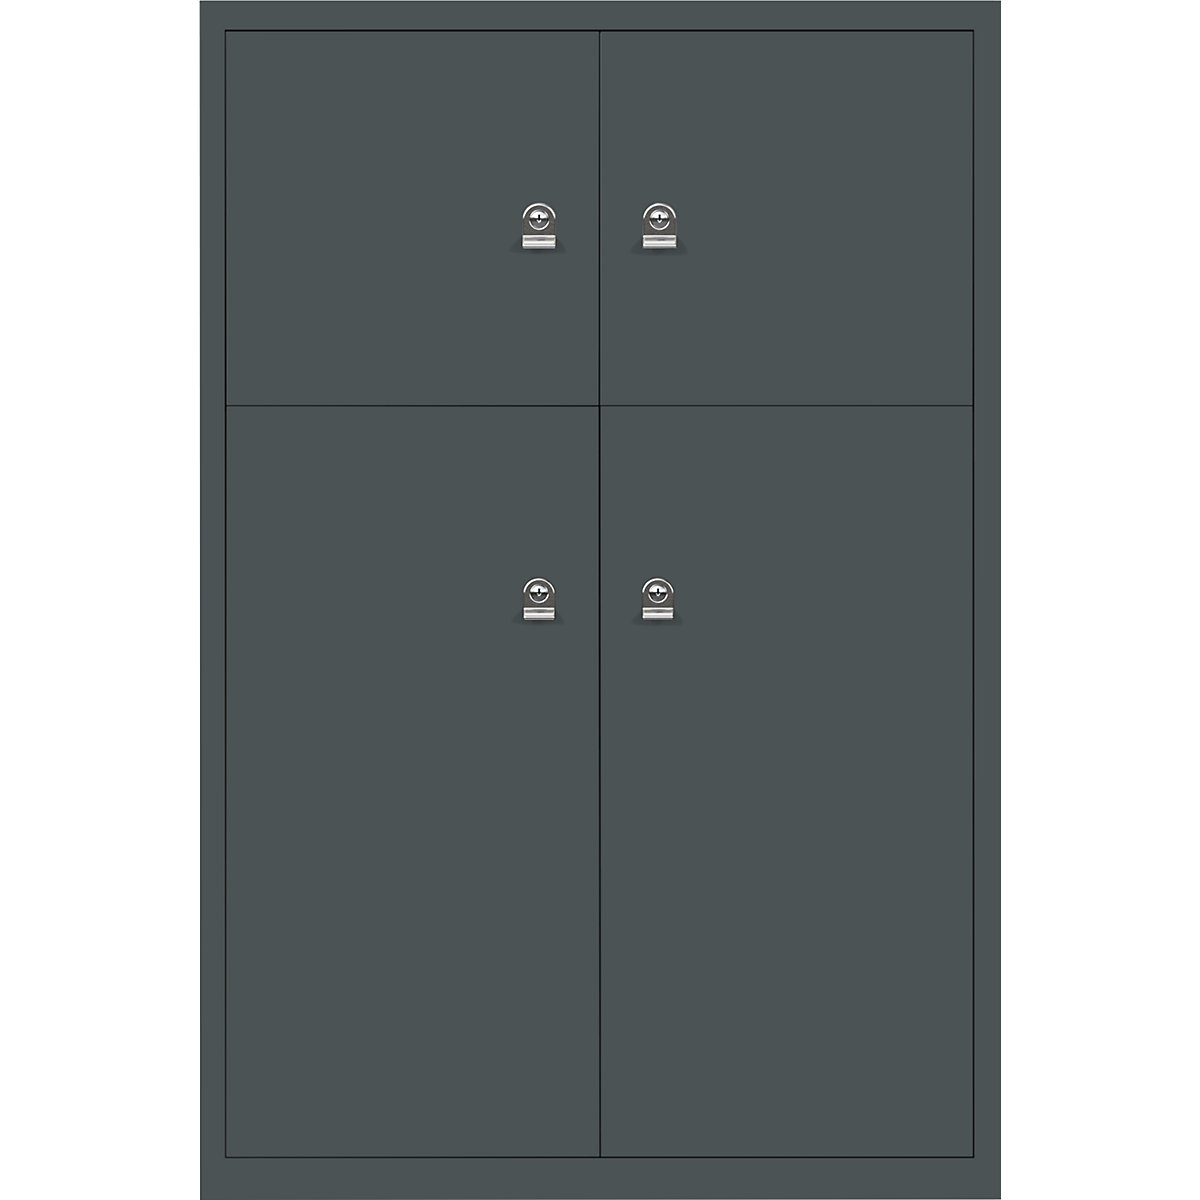 BISLEY – LateralFile™ lodge, with 4 lockable compartments, height 2 x 375 mm, 2 x 755 mm, charcoal